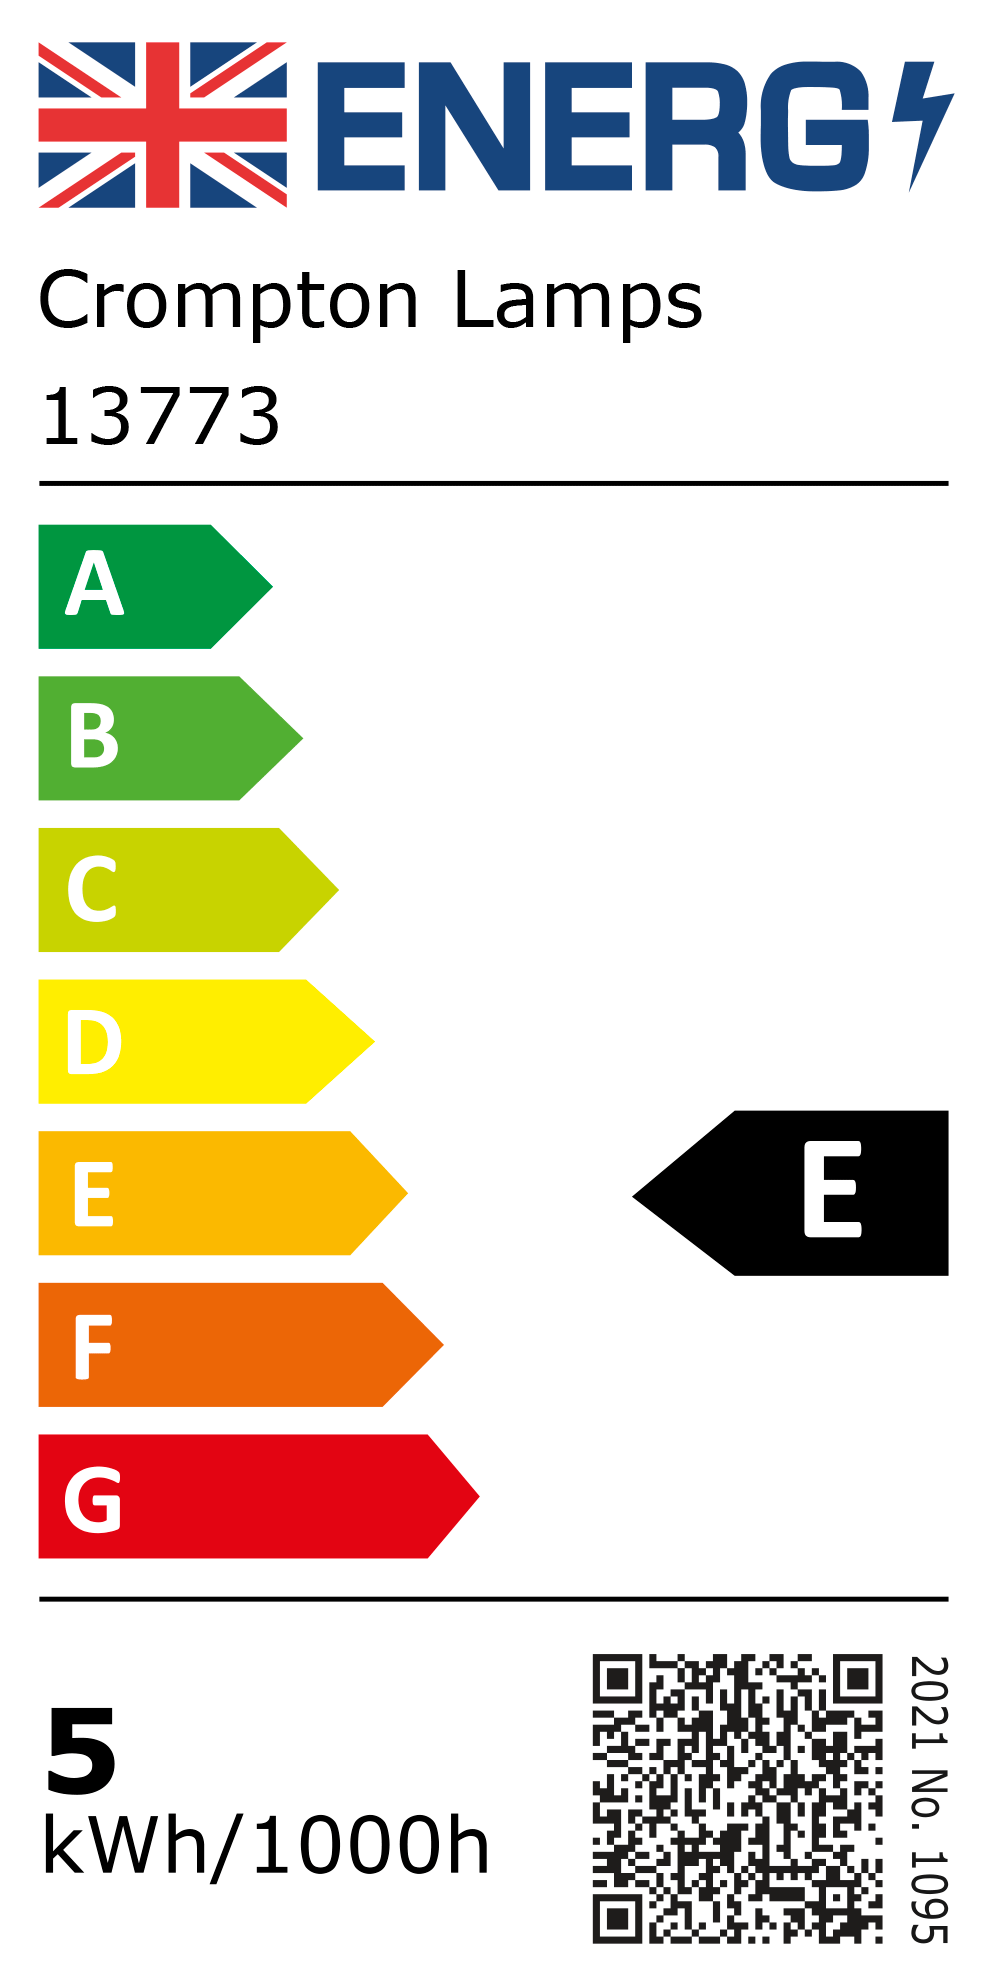 New 2021 Energy Rating Label: Stock Code 13773